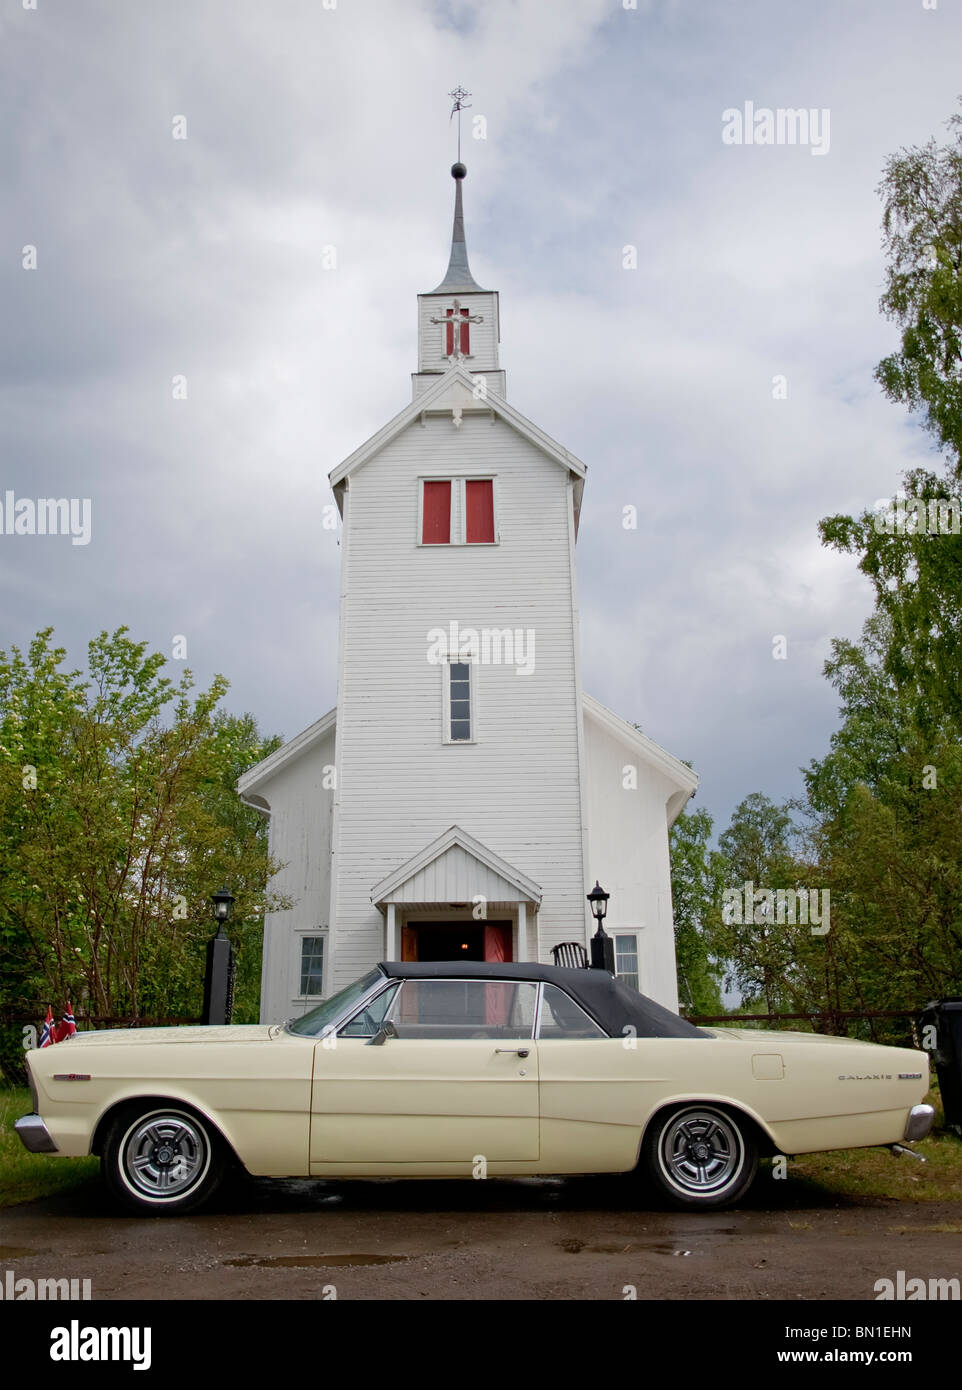 A 1966 Ford Galaxie 500 parked outside a church used as a wedding car Stock Photo